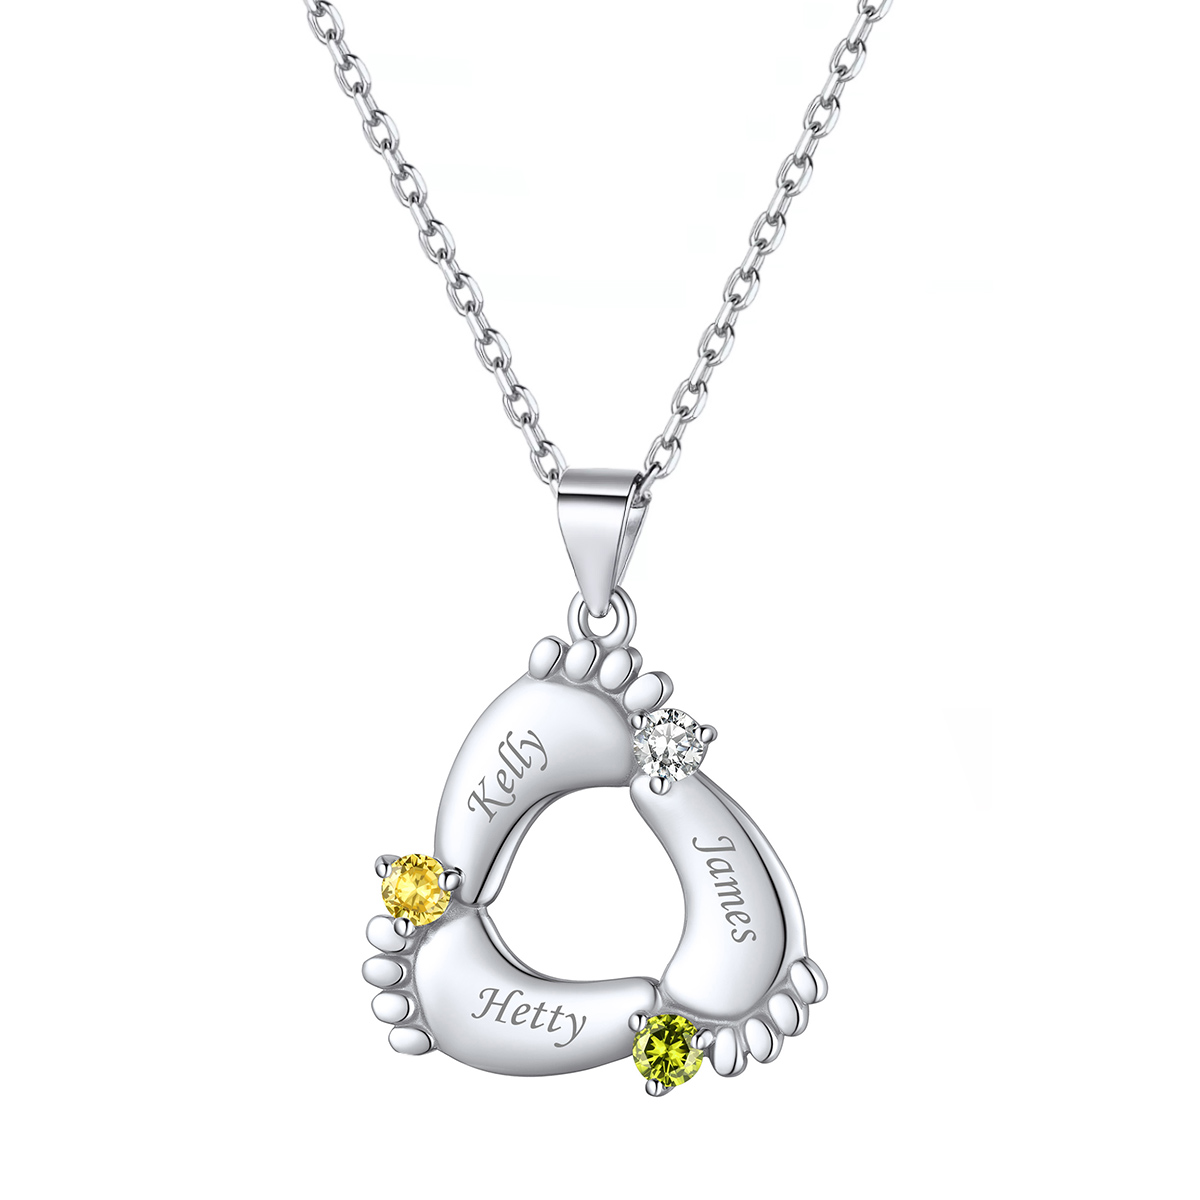 ChicSilver 925 Sterling Silver Baby Feet Name Necklace With 3 Birthstones for Mother